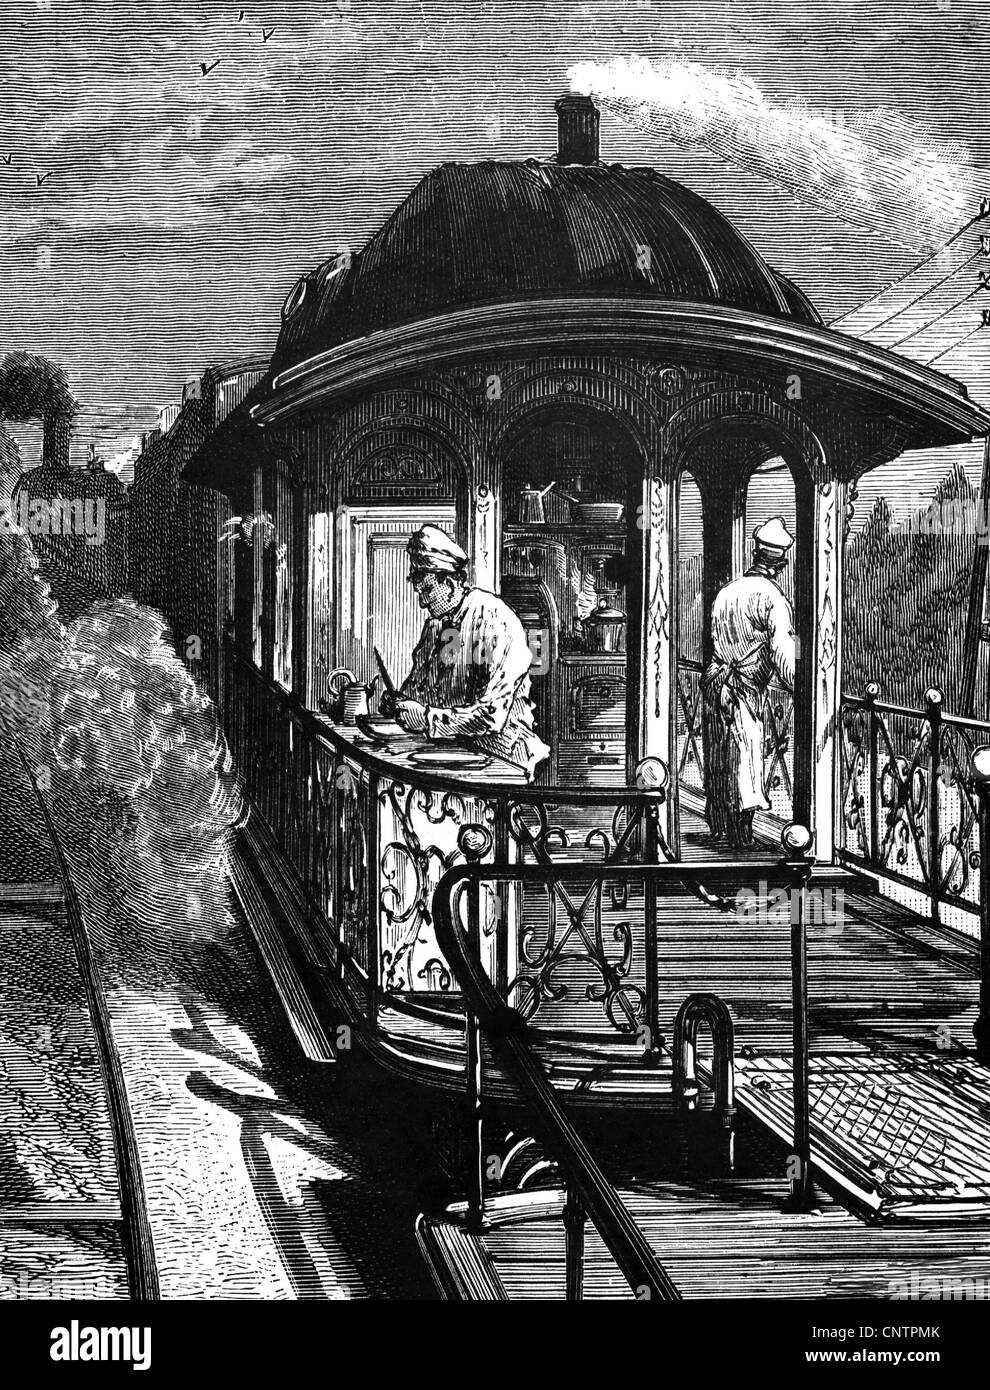 transport / transportation, railway, interior, kitchen of a train restaurant, Pullman coach, Great Britain, wood engraving, 19th century, historic, historical, train ride, train rides, train journey, train journeys, driving, dining carriage, diner, buffet carriage, dining carriages, diners, buffet carriages, railway carriage, railway carriages, gastronomy, service, services, foods, meals, catering, restaurant, restaurants, rail, travel by rail, rail, train, trains, railway, railroad, railways, railroads, carriage, carriages, people, Additional-Rights-Clearences-Not Available Stock Photo